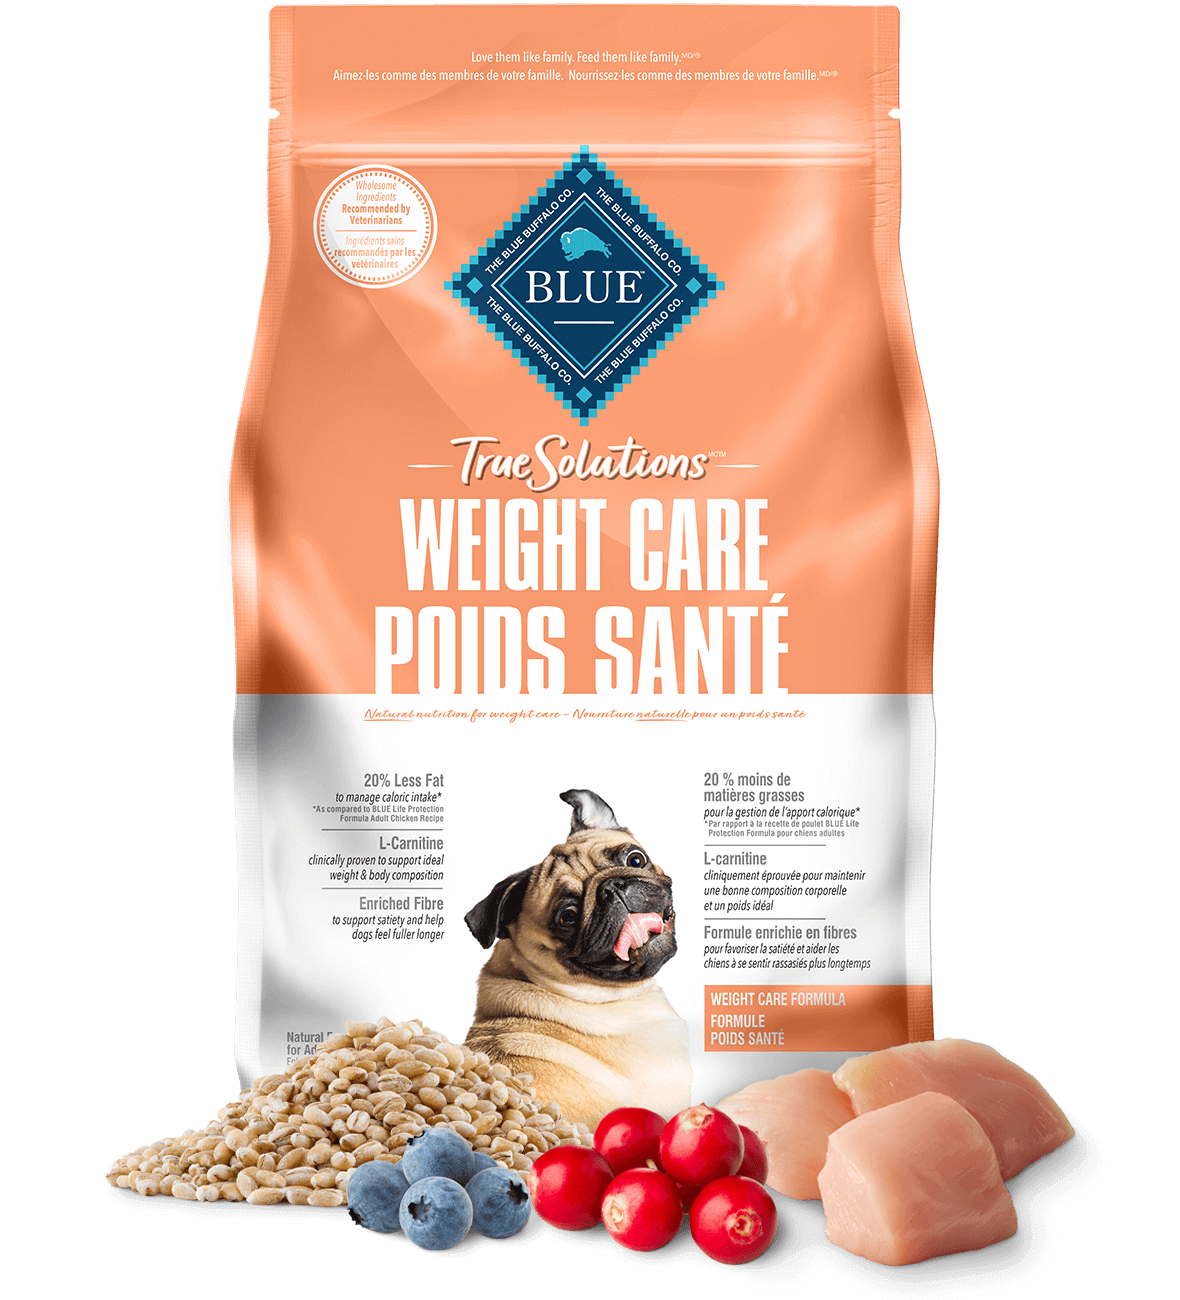 blue true solutions weight care formula dog dry food